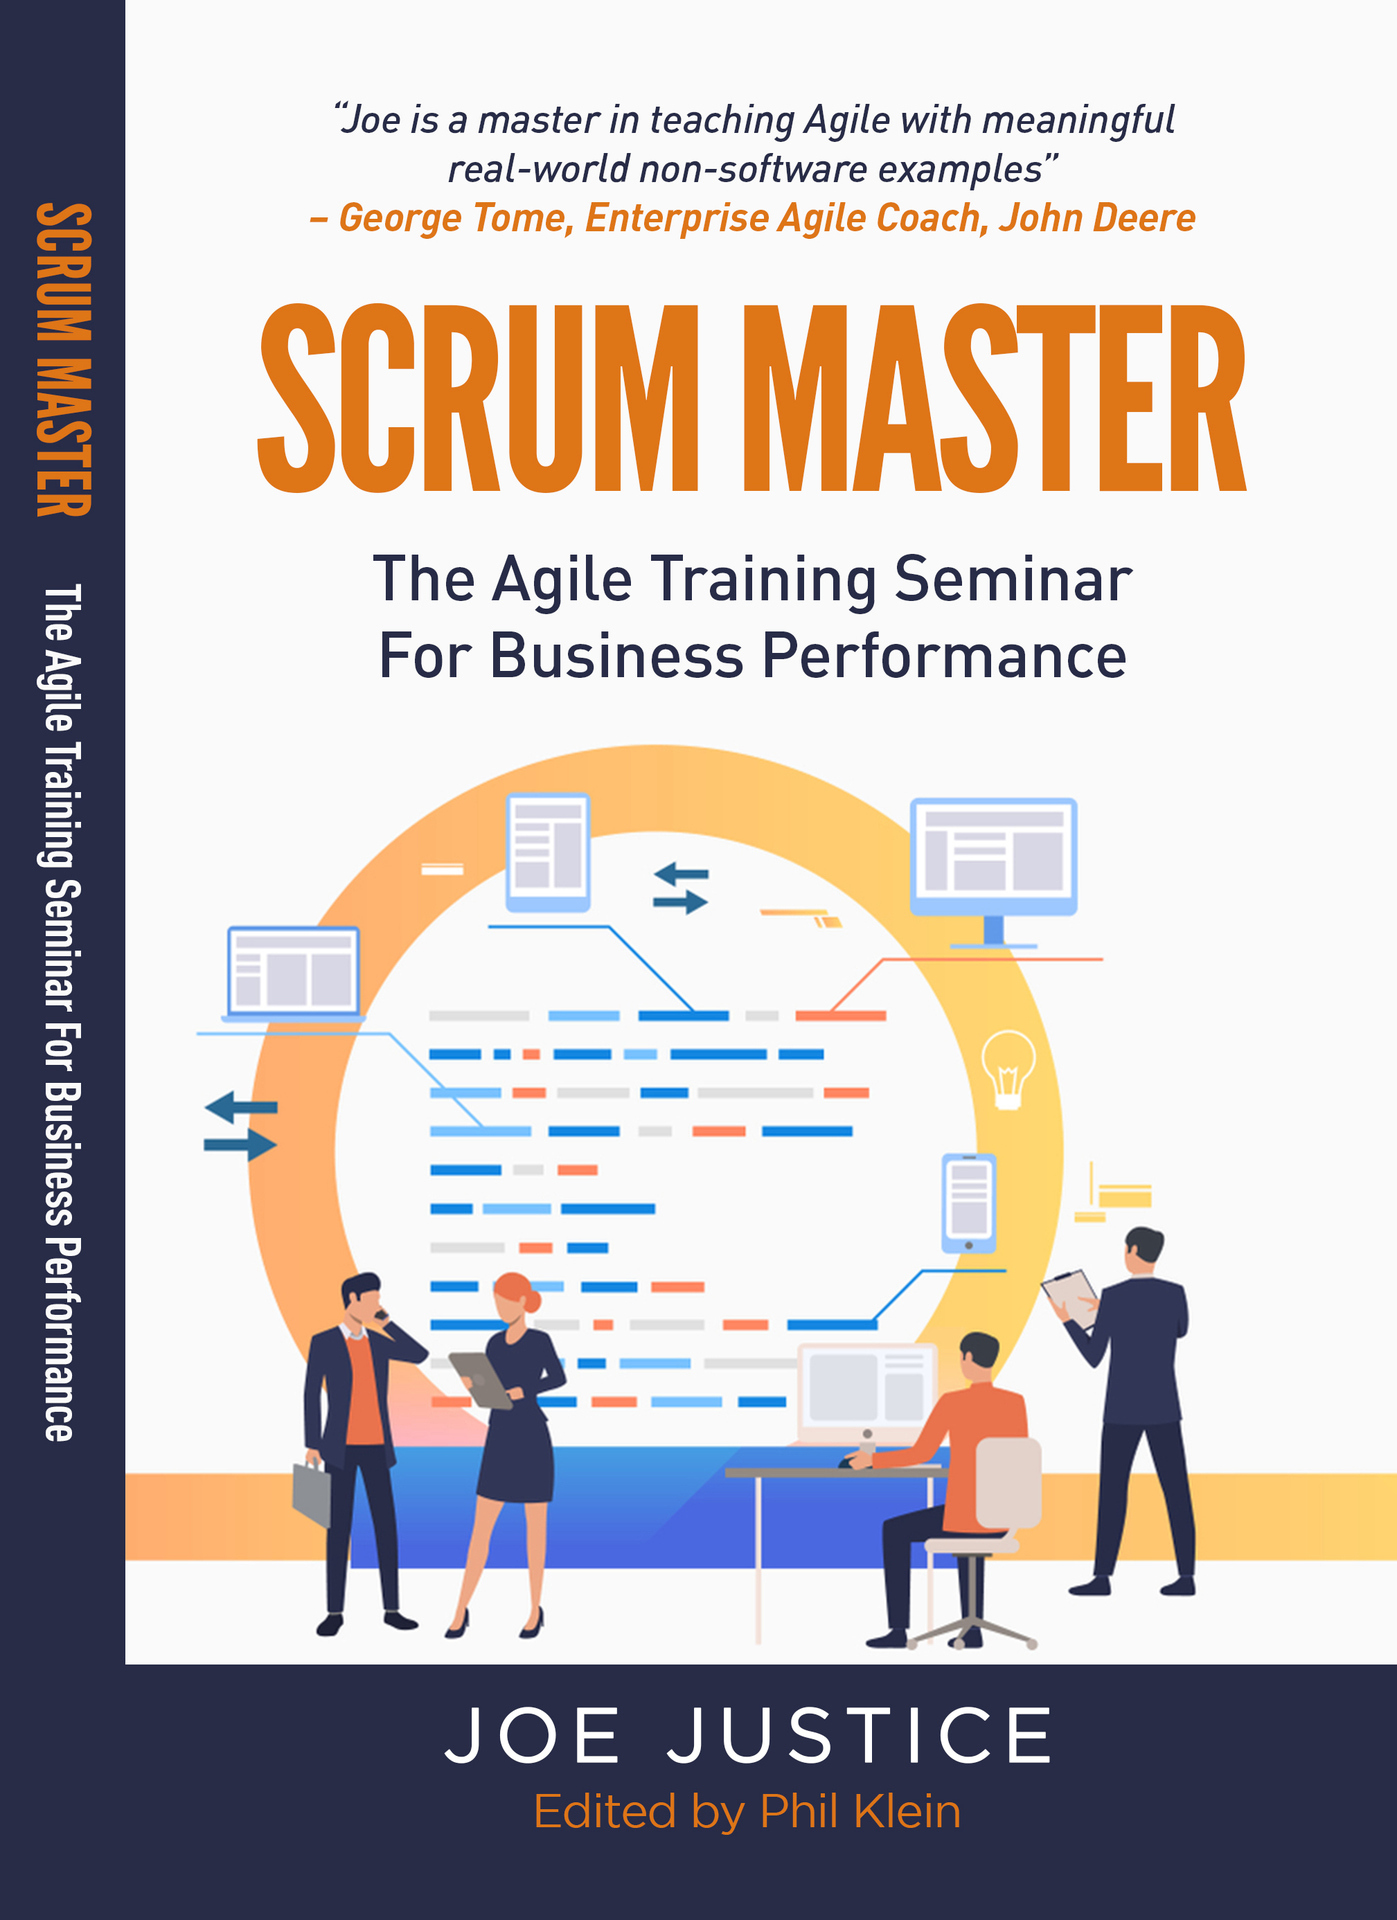 Scrum Master: The Agile Training Seminar for Business Performance